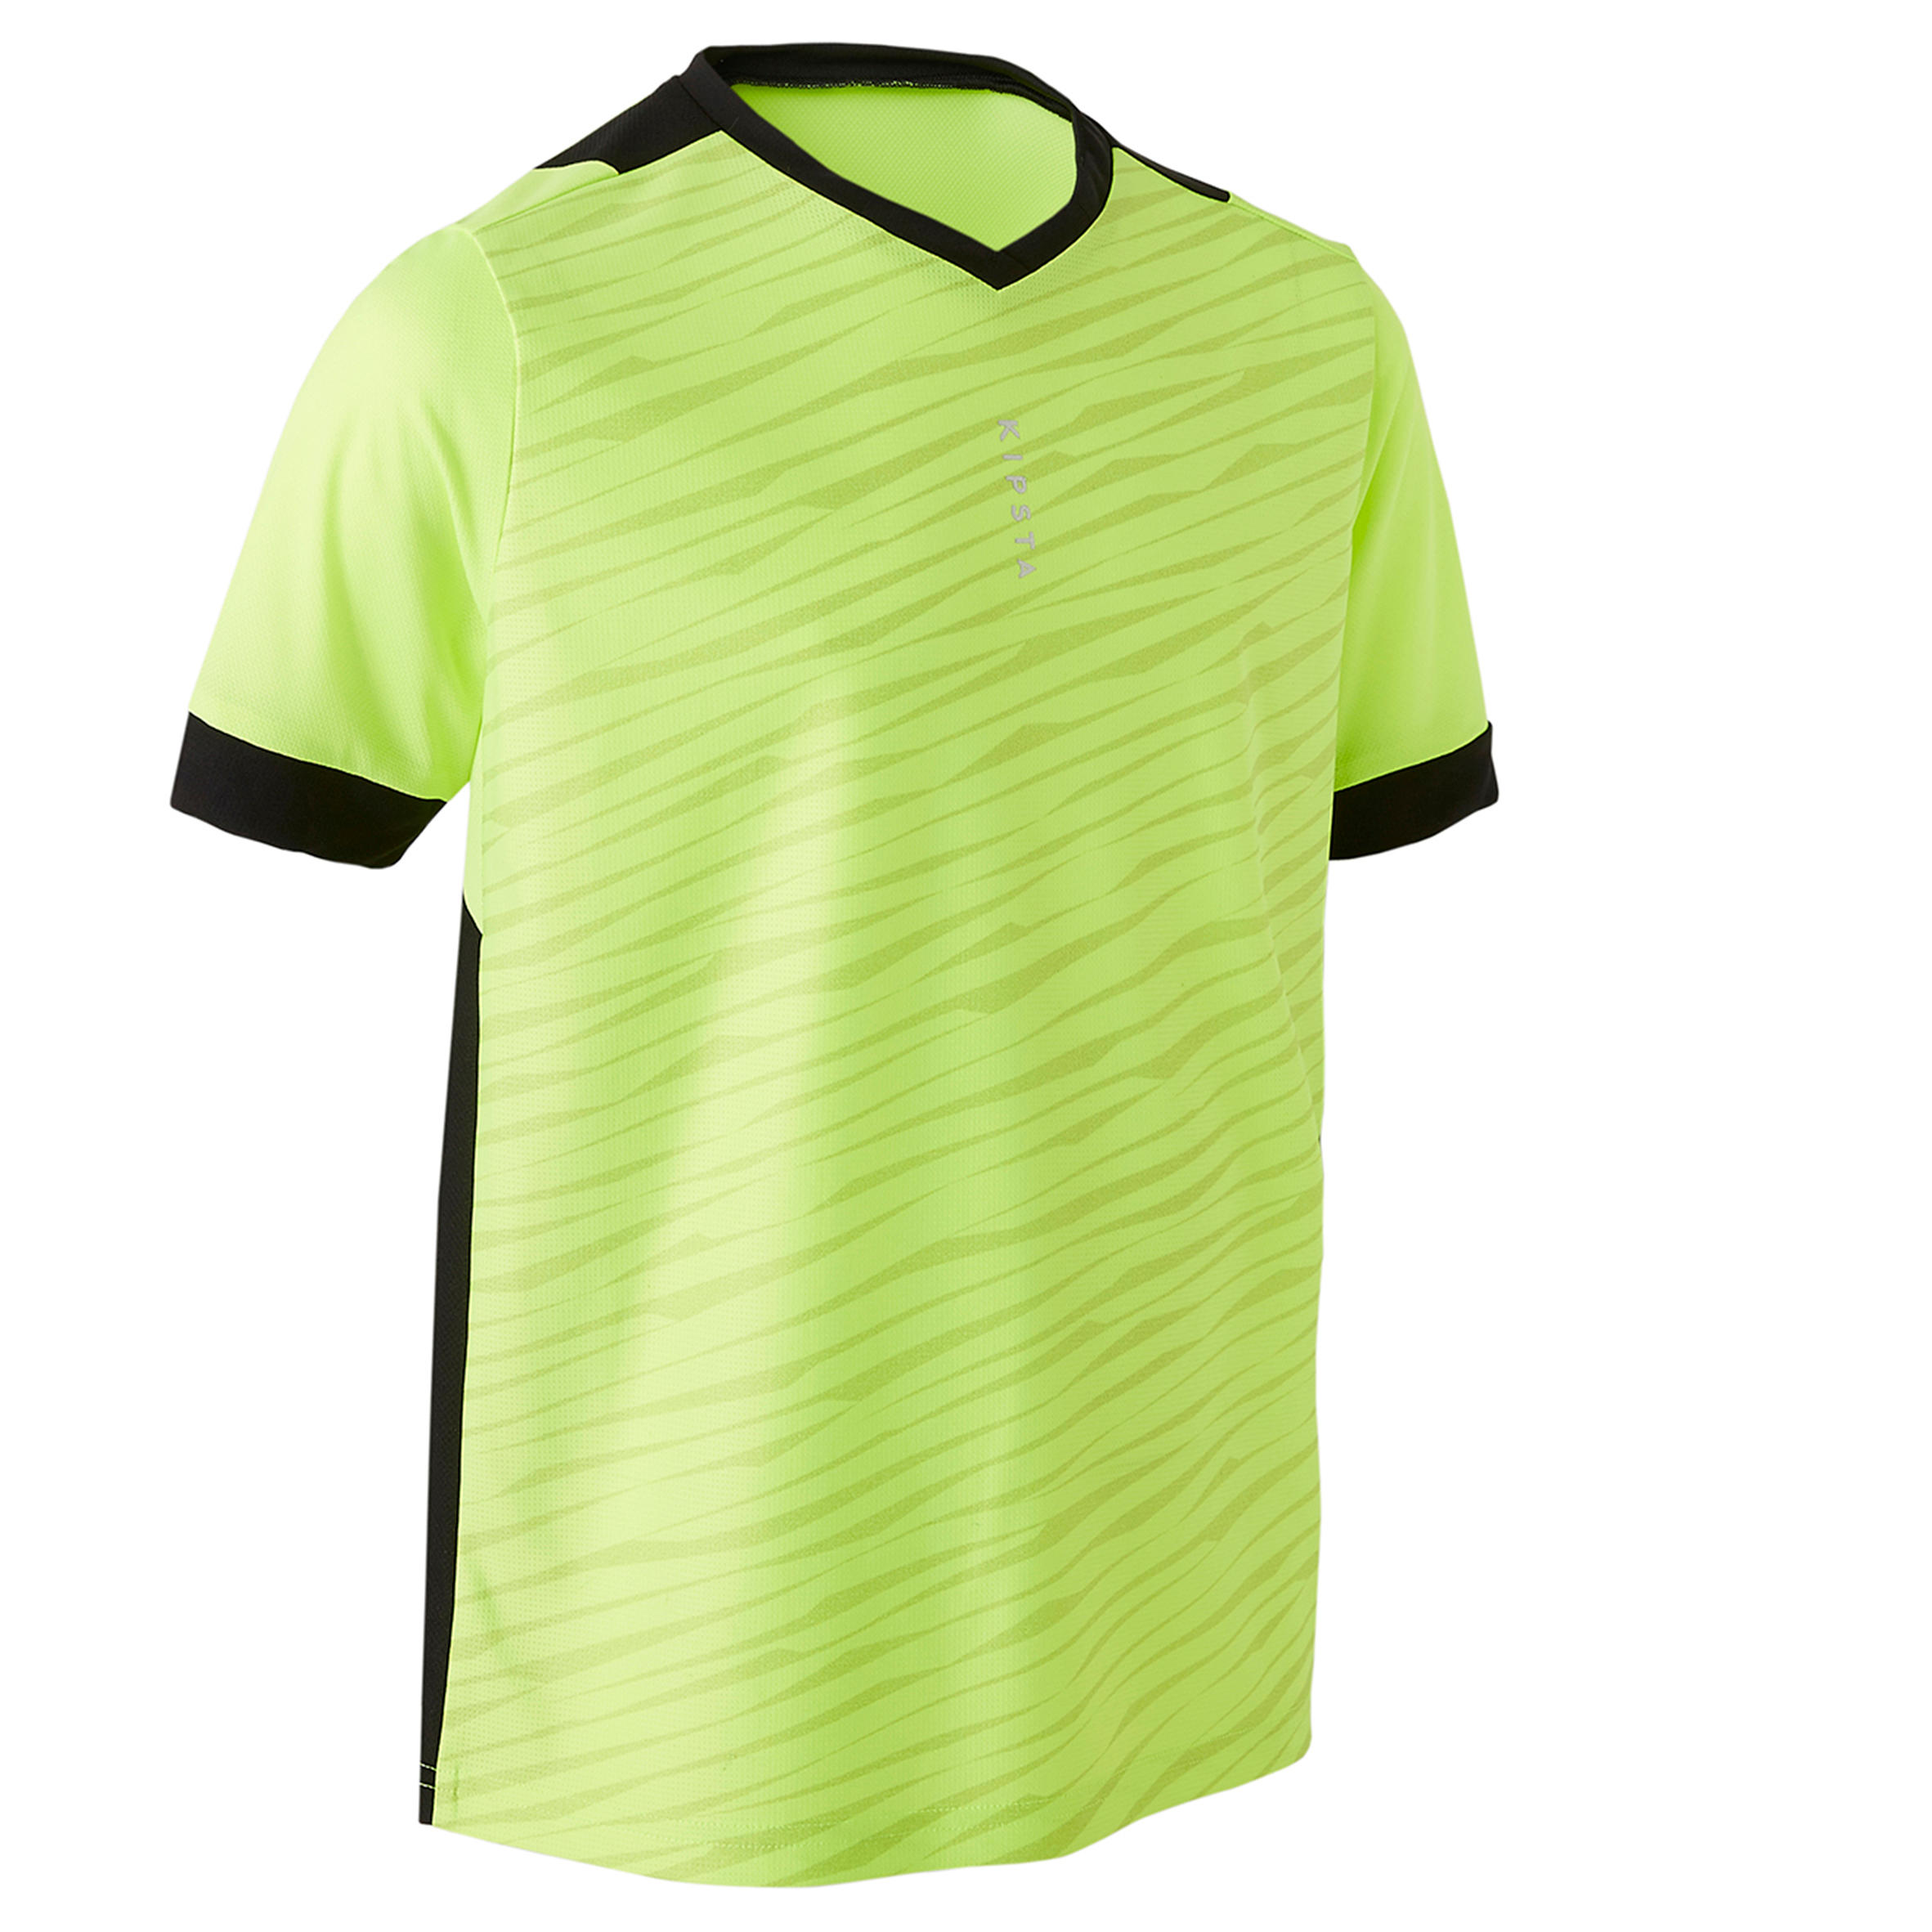 where to buy football jerseys online india